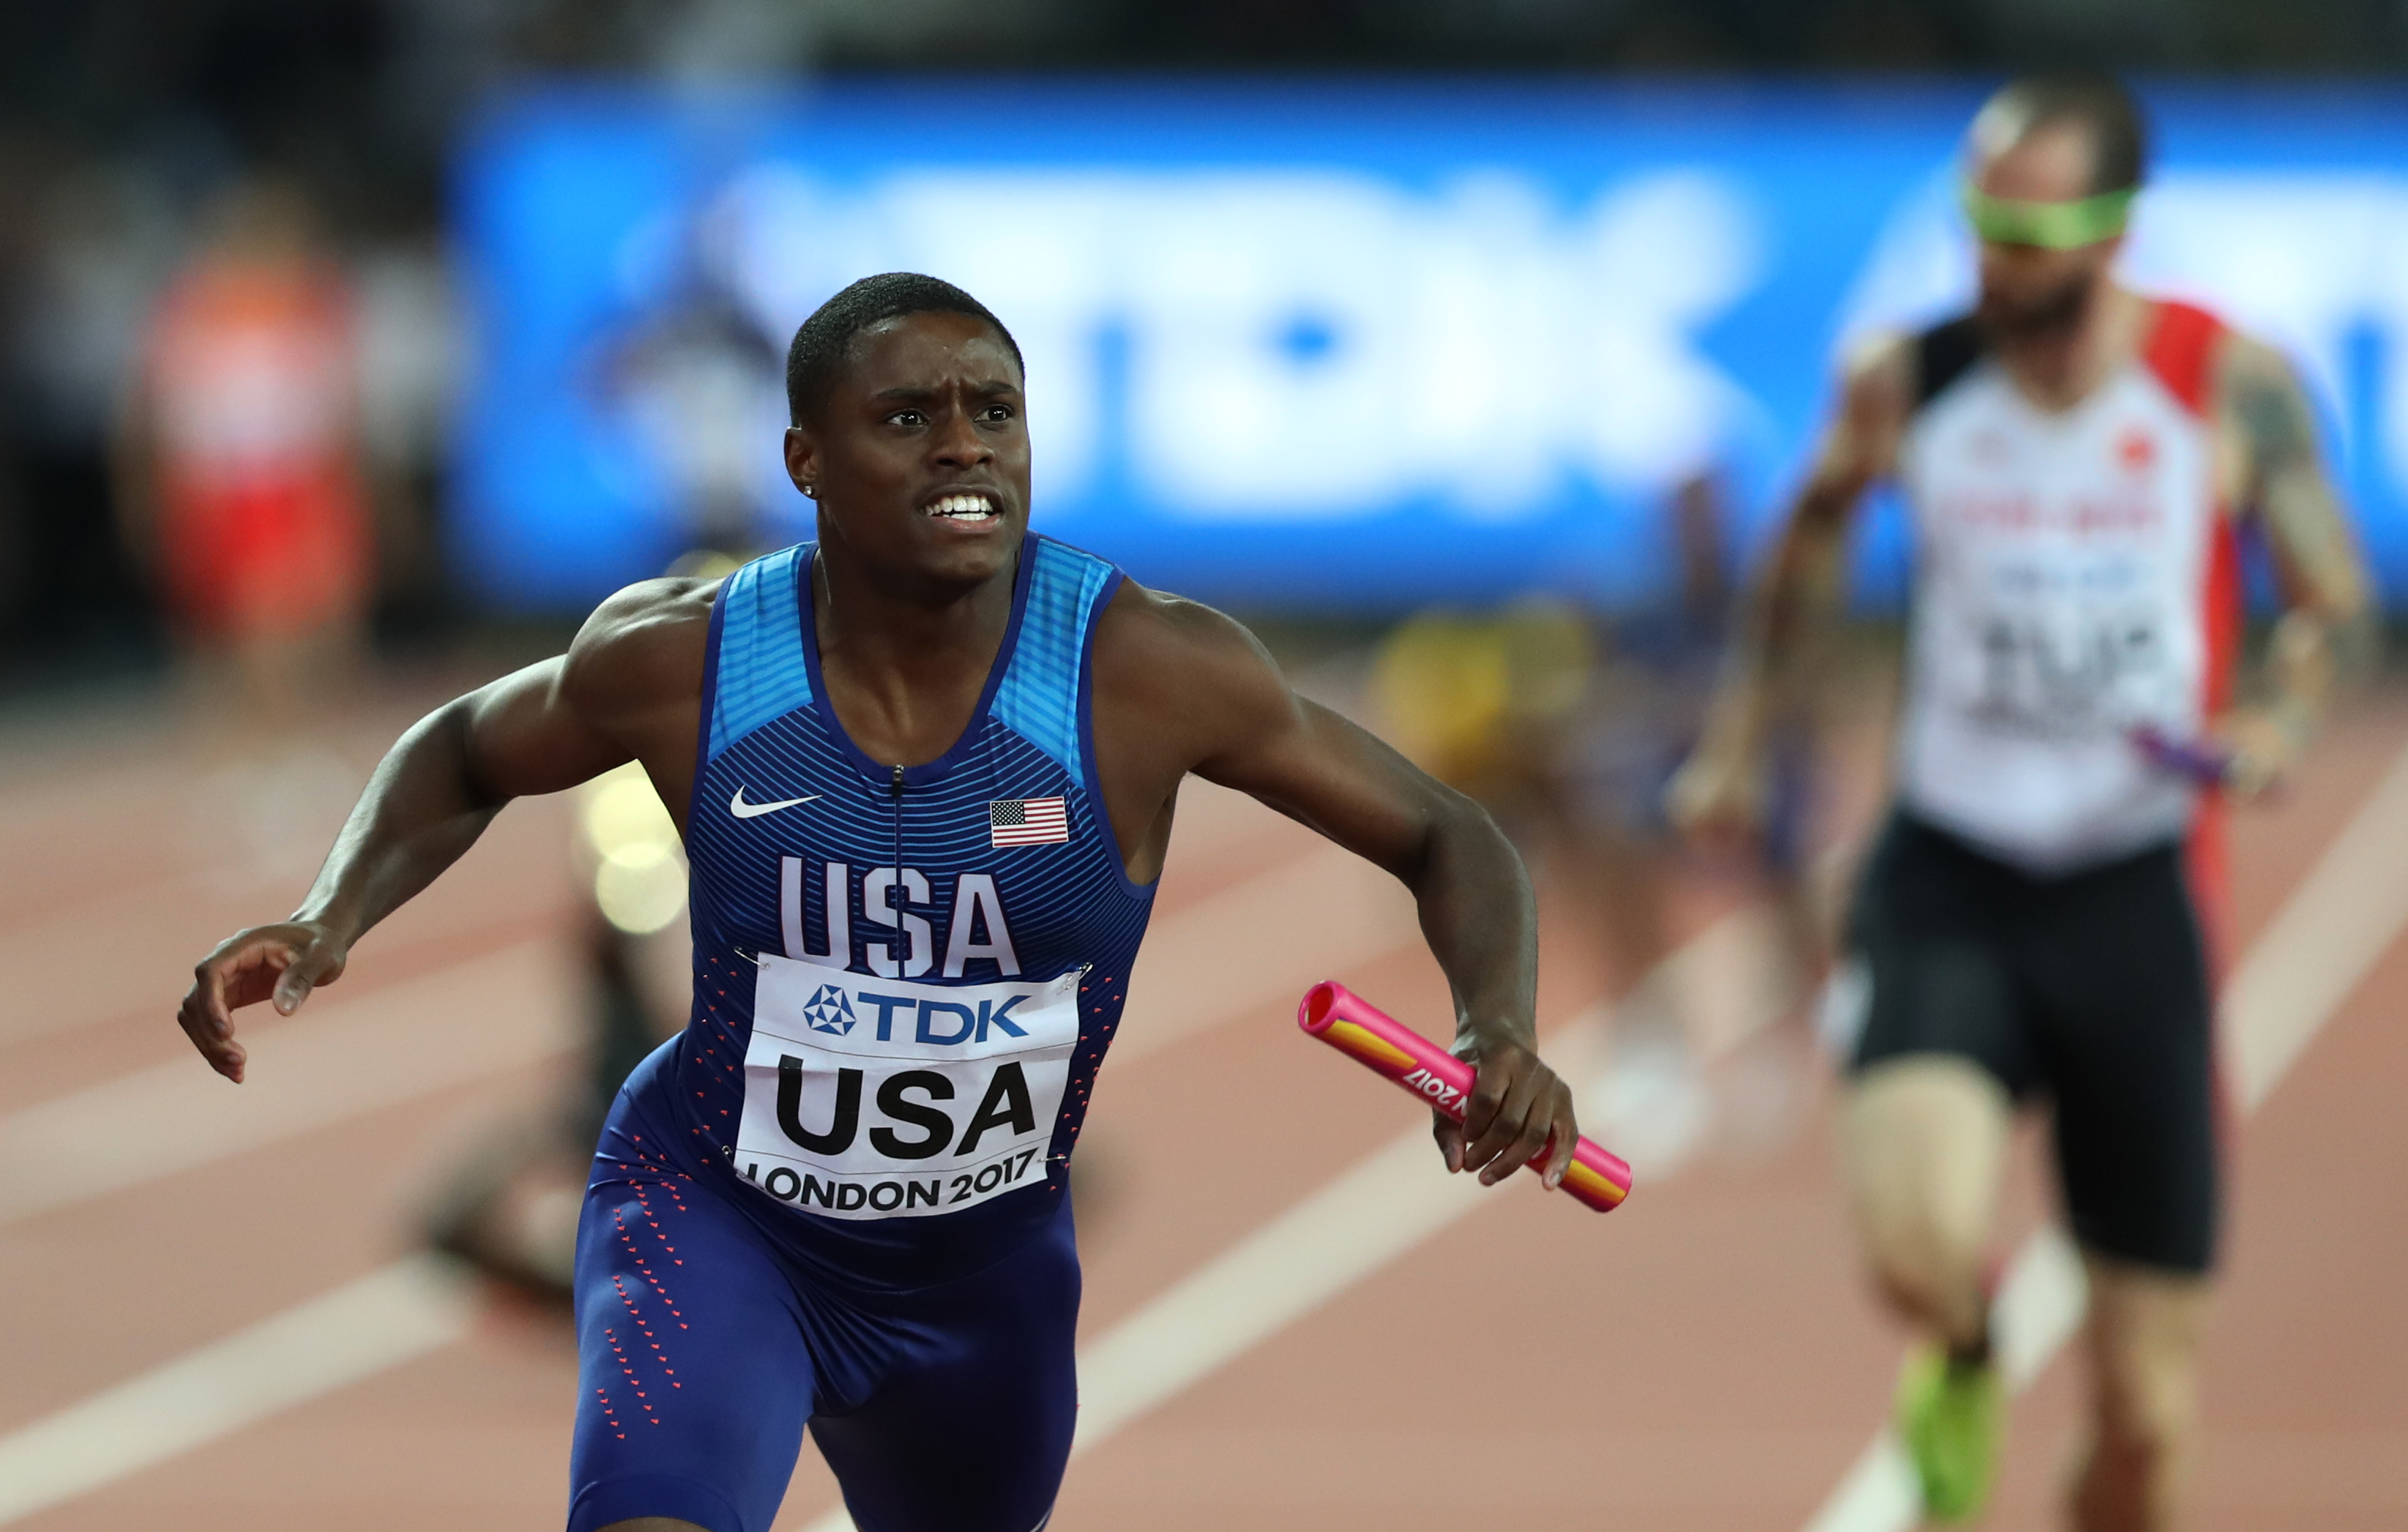 21-year old Christian Coleman sets new 60m indoor world record